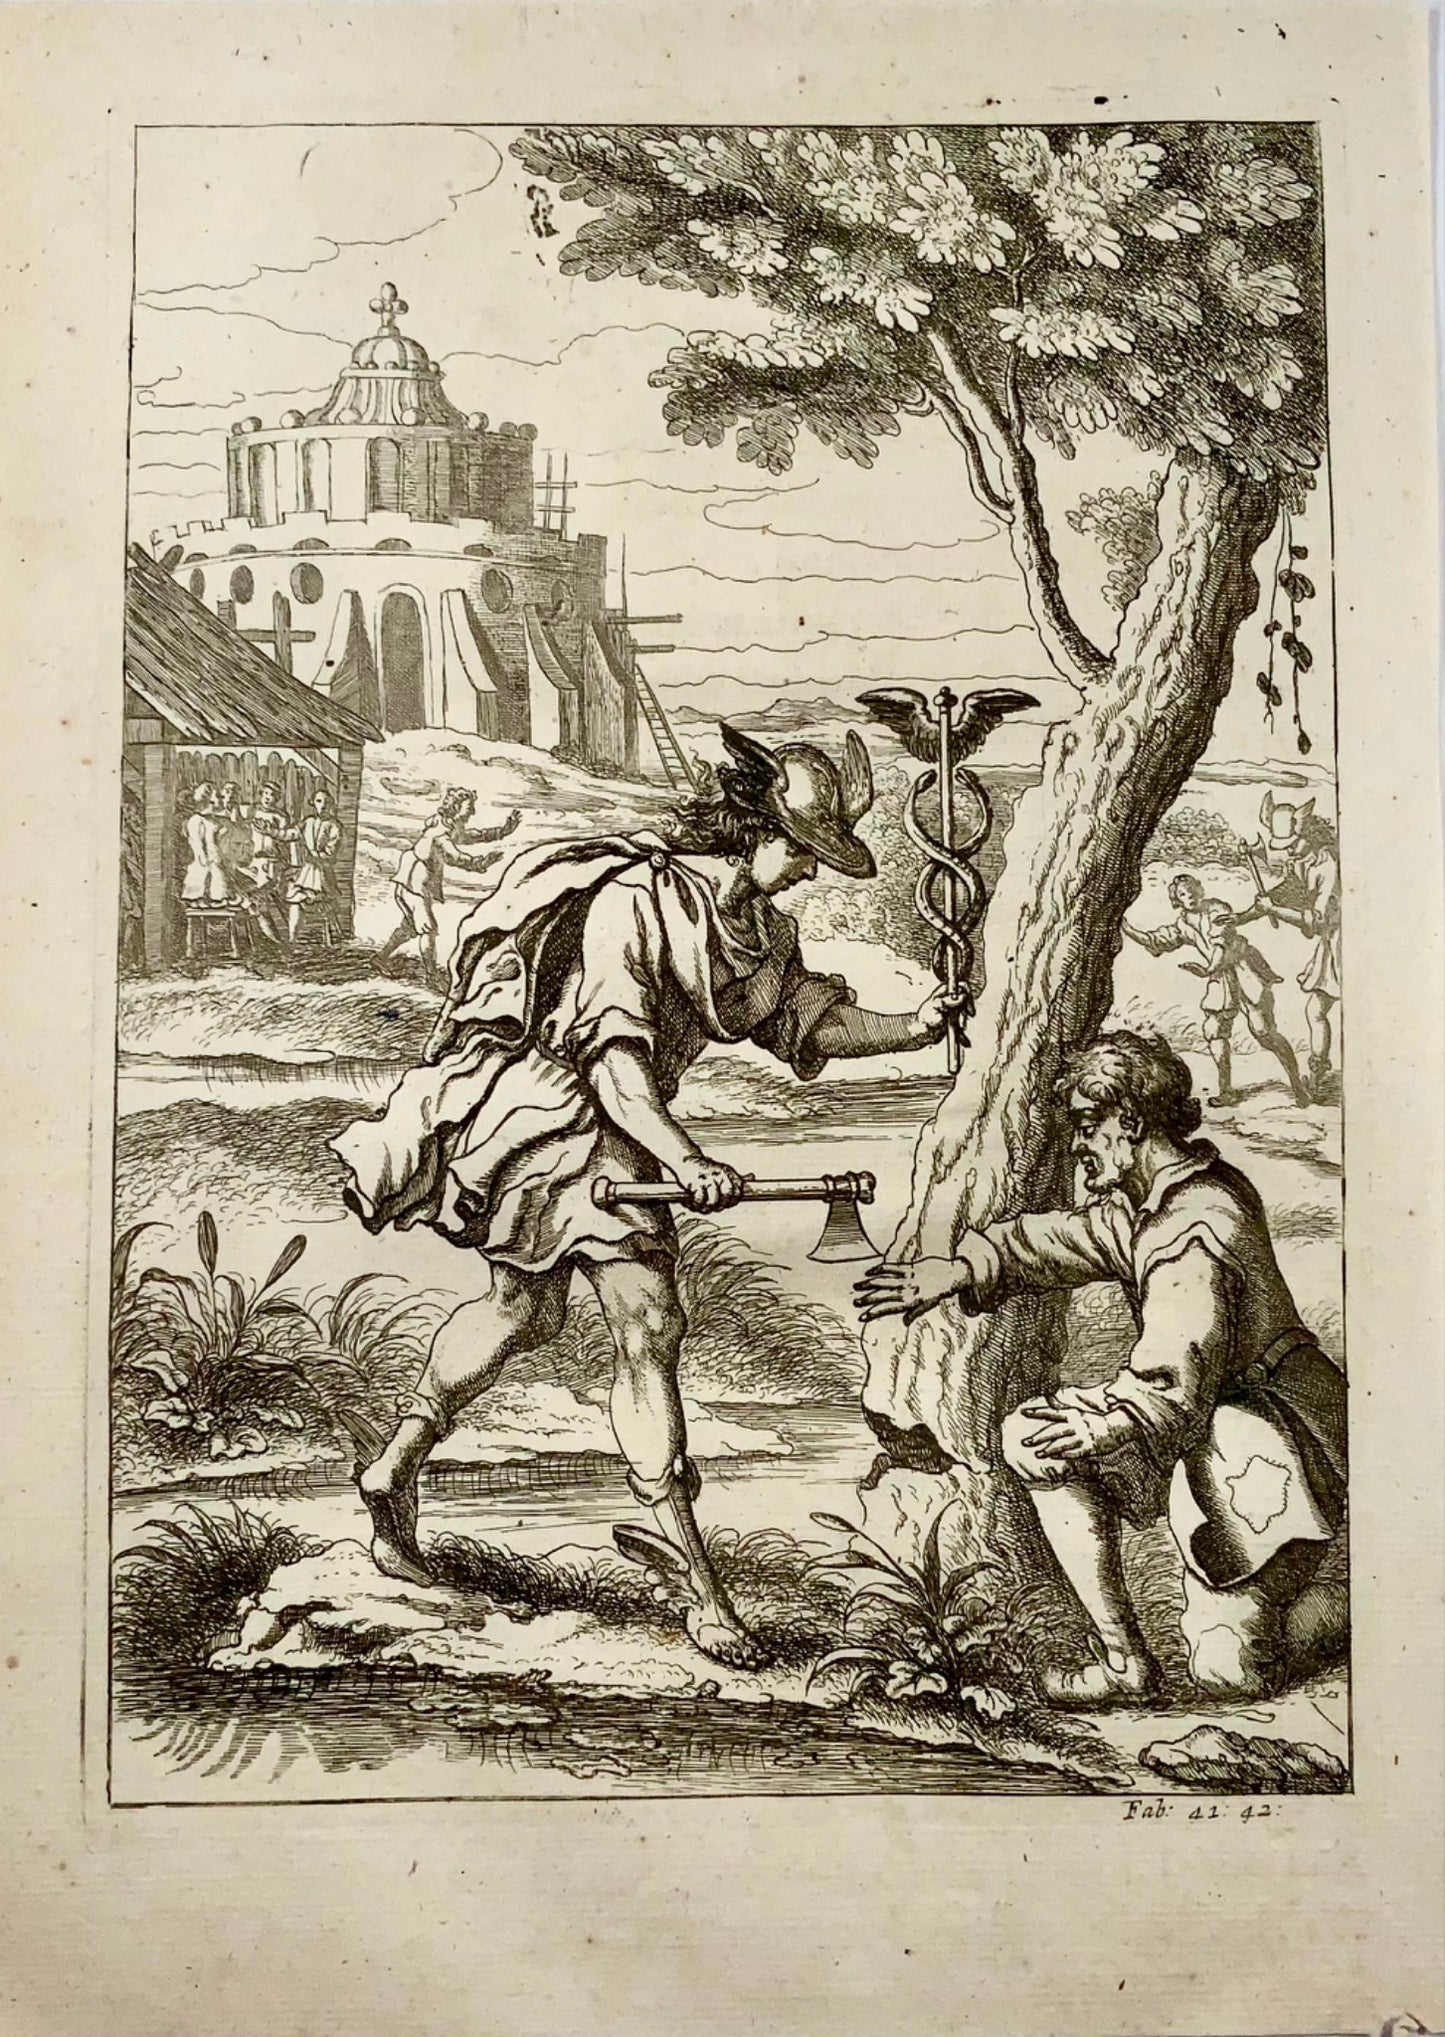 1666 Francis Barlow (1626?-1702), Mercury and the Carpenter, folio, fable, master engraving